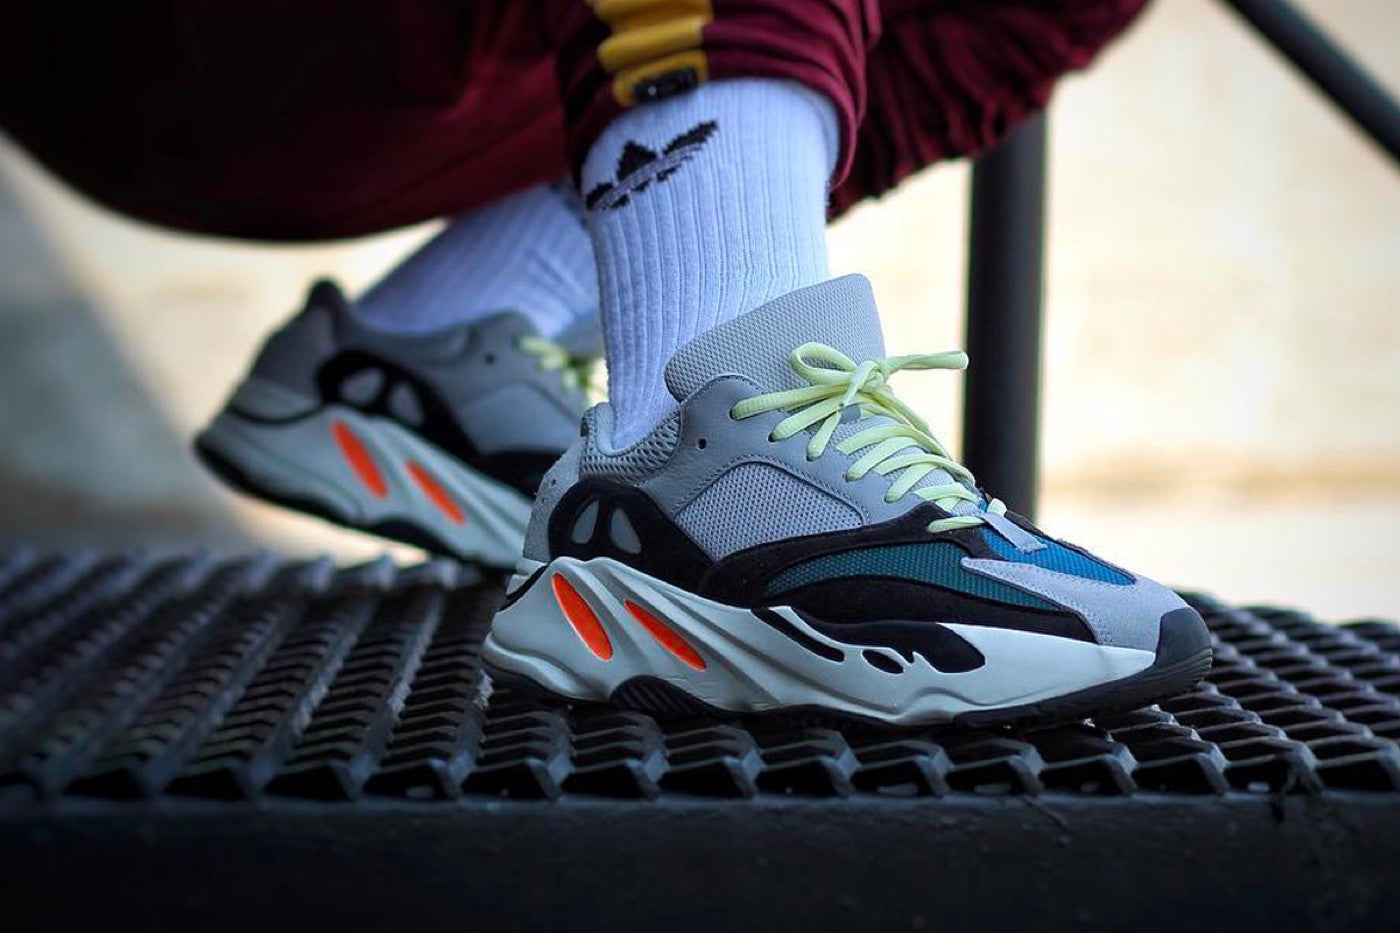 The Yeezy Boost 700 "Wave Runner" is Restocking for the Last Time Ever